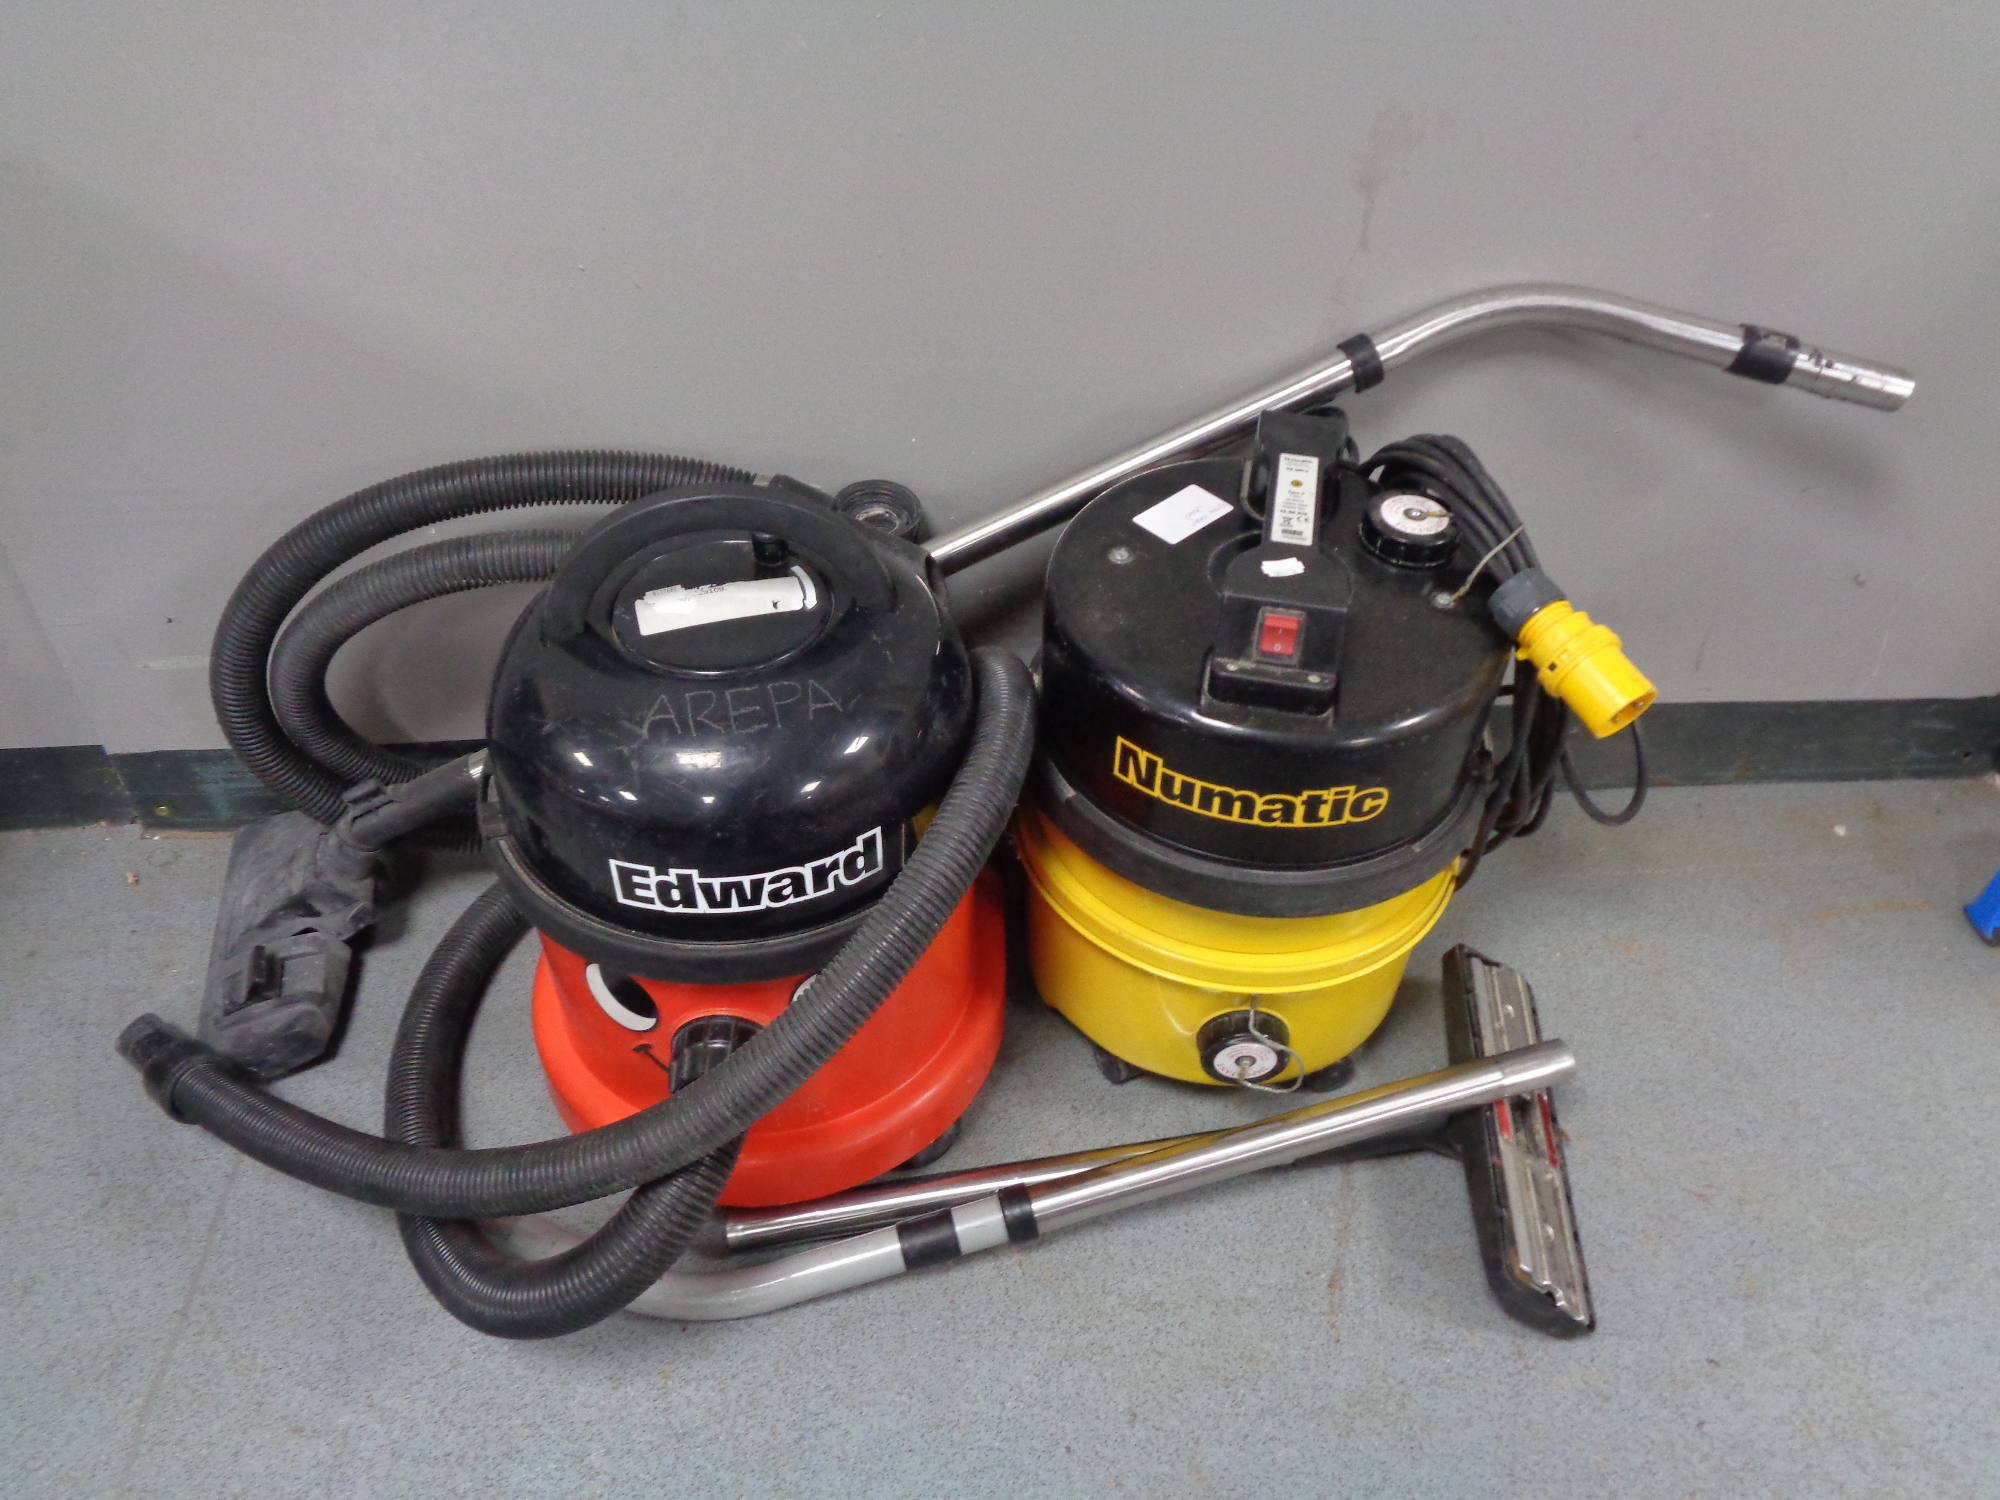 A Numatic and an Edward 110V commercial vacuums with hoses and accessories.